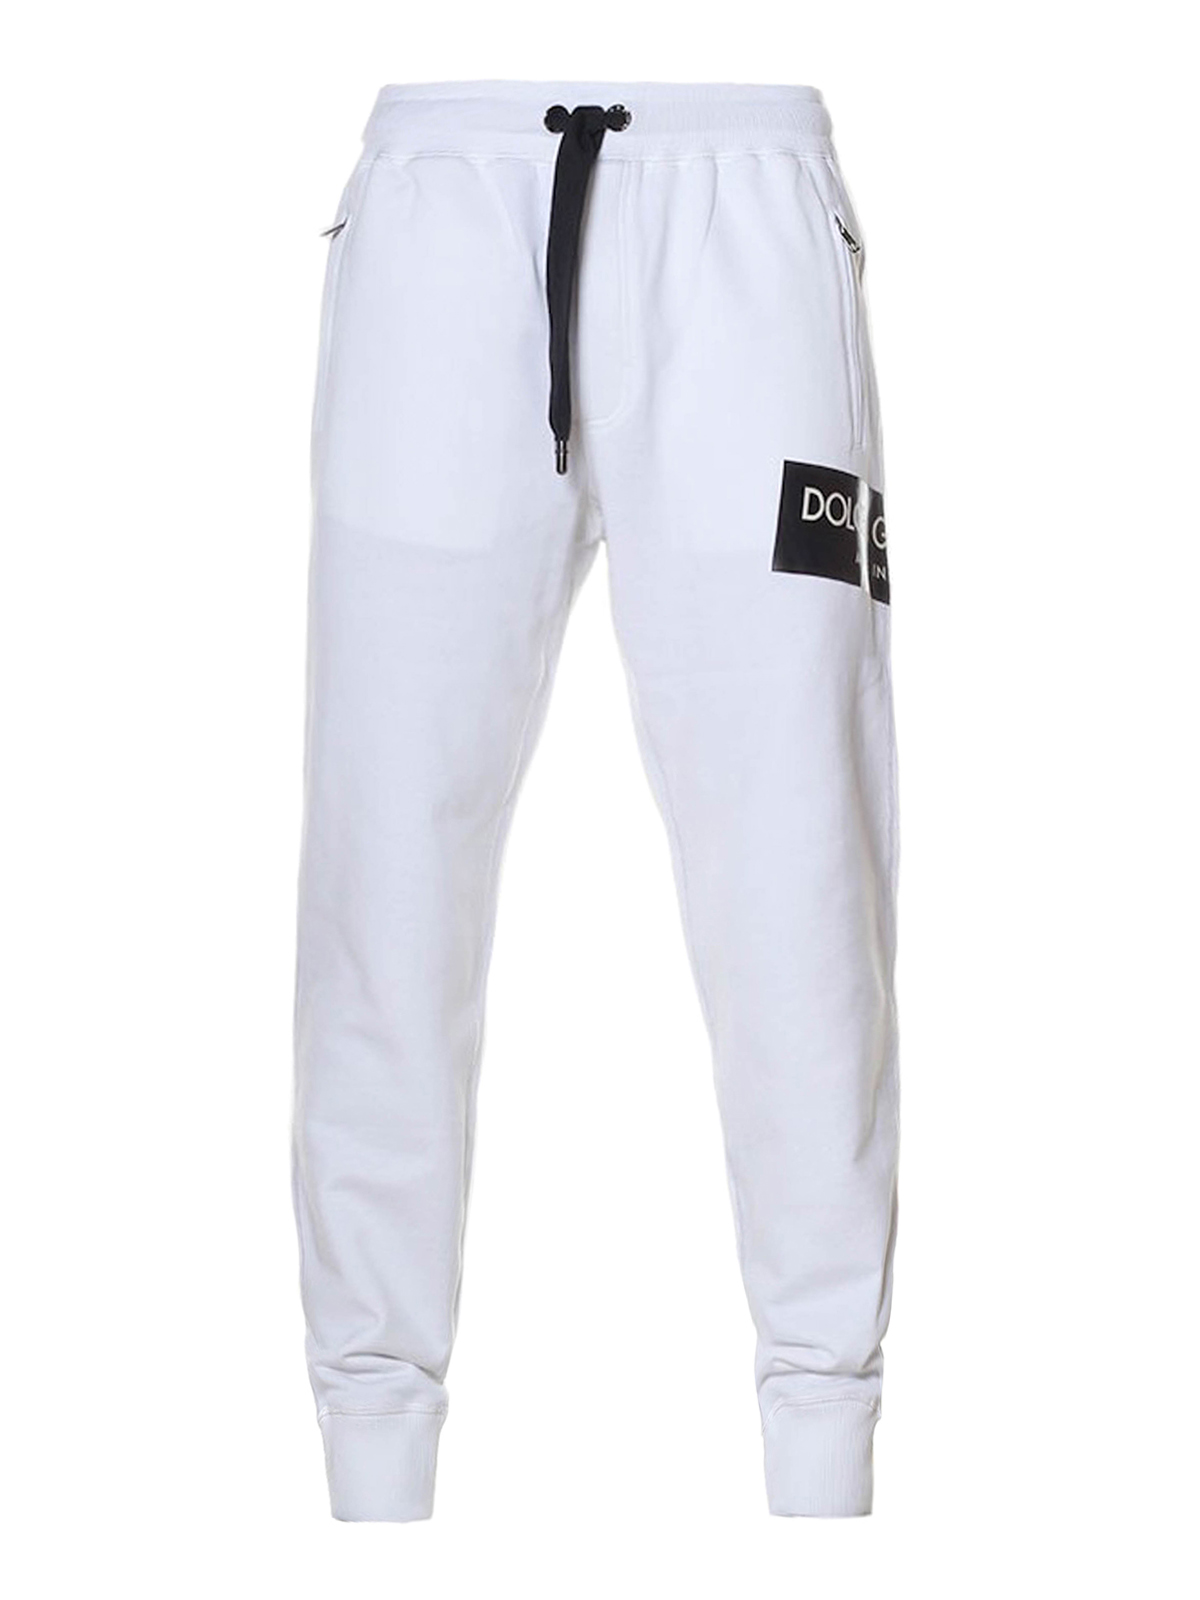 dolce and gabbana grey tracksuit